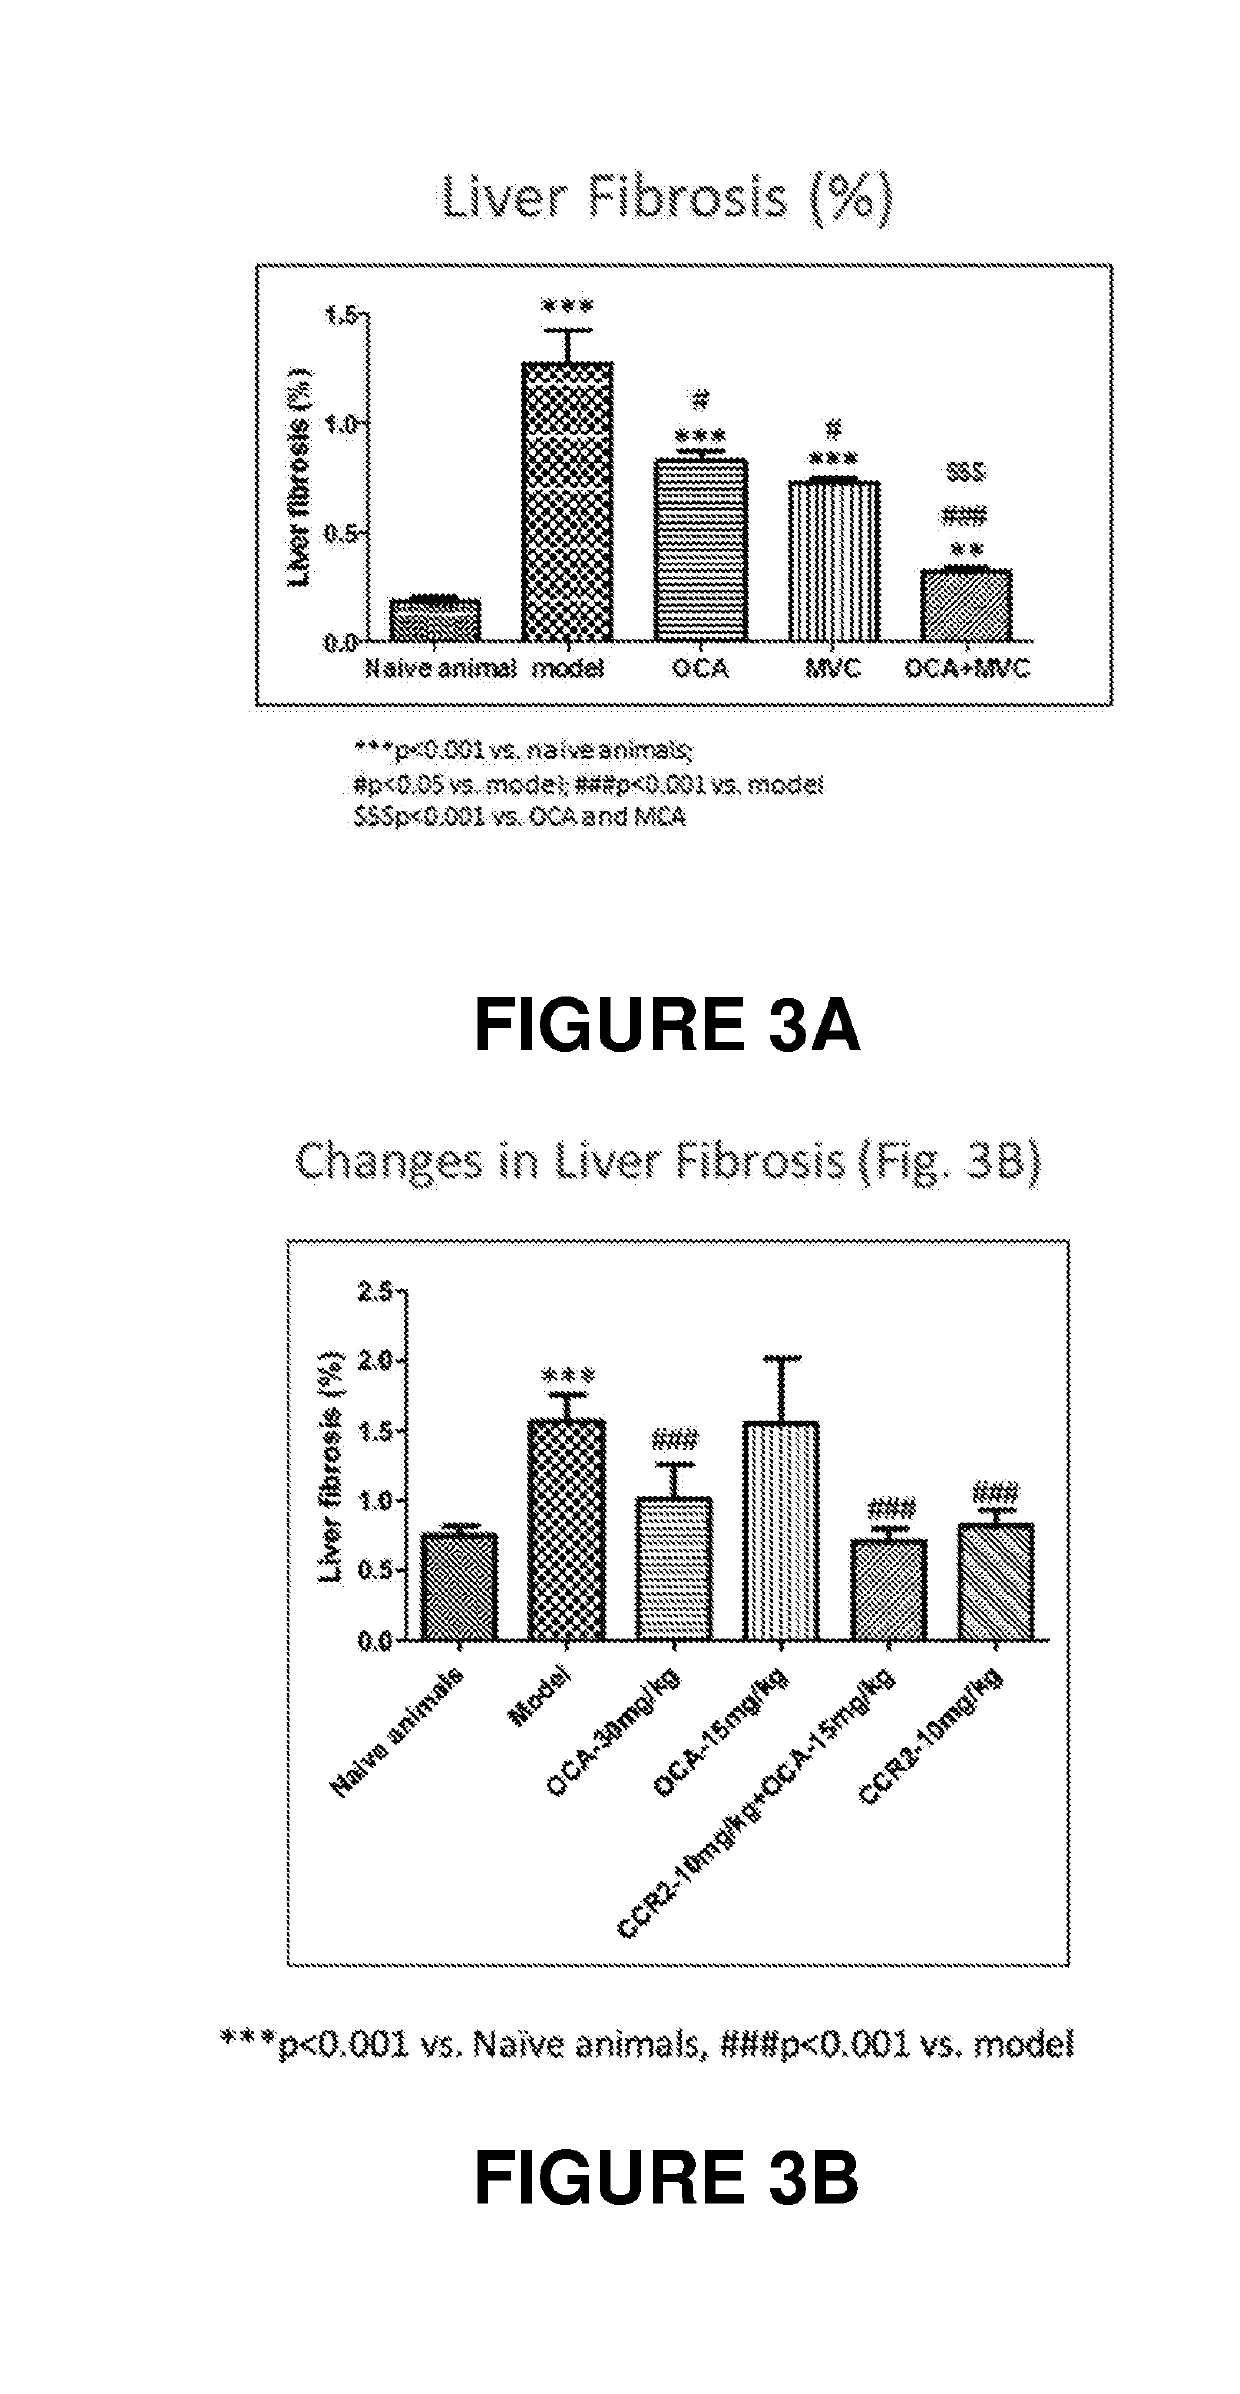 Combination therapy for nonalcoholic steatohepatitis (NASH) and liver fibrosis